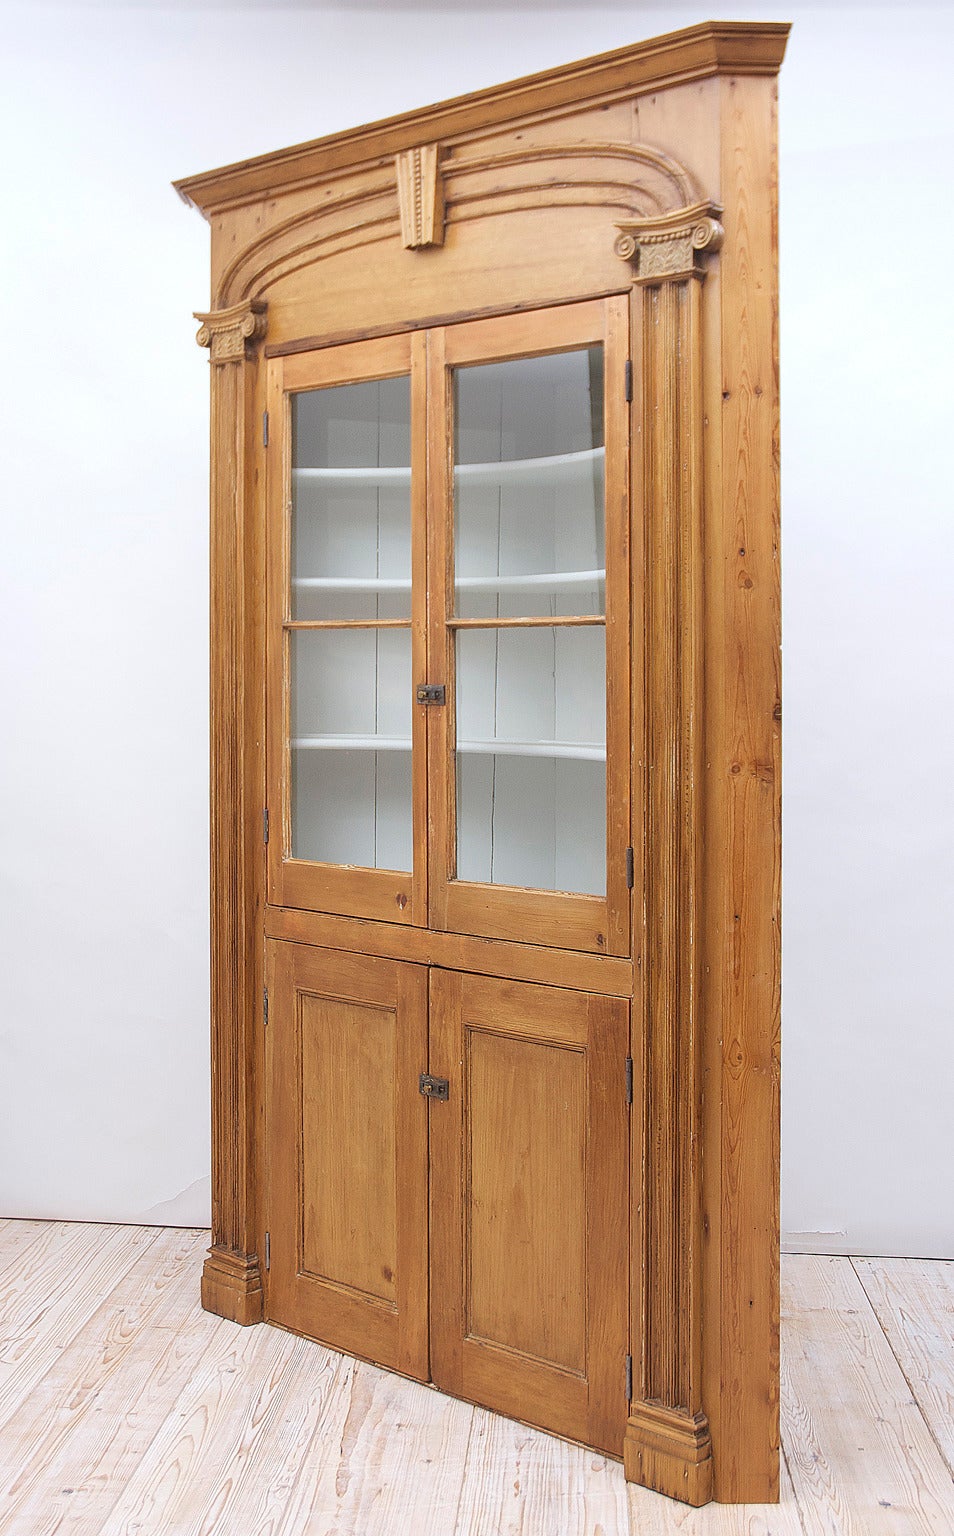 An American Federal Corner Cupboard in pine with painted pale grey interior. Features carved and fluted pilasters with Doric capitals decorated with the tree of life motif, flanking cabinet with glass-mullioned upper doors above wooden-paneled lower